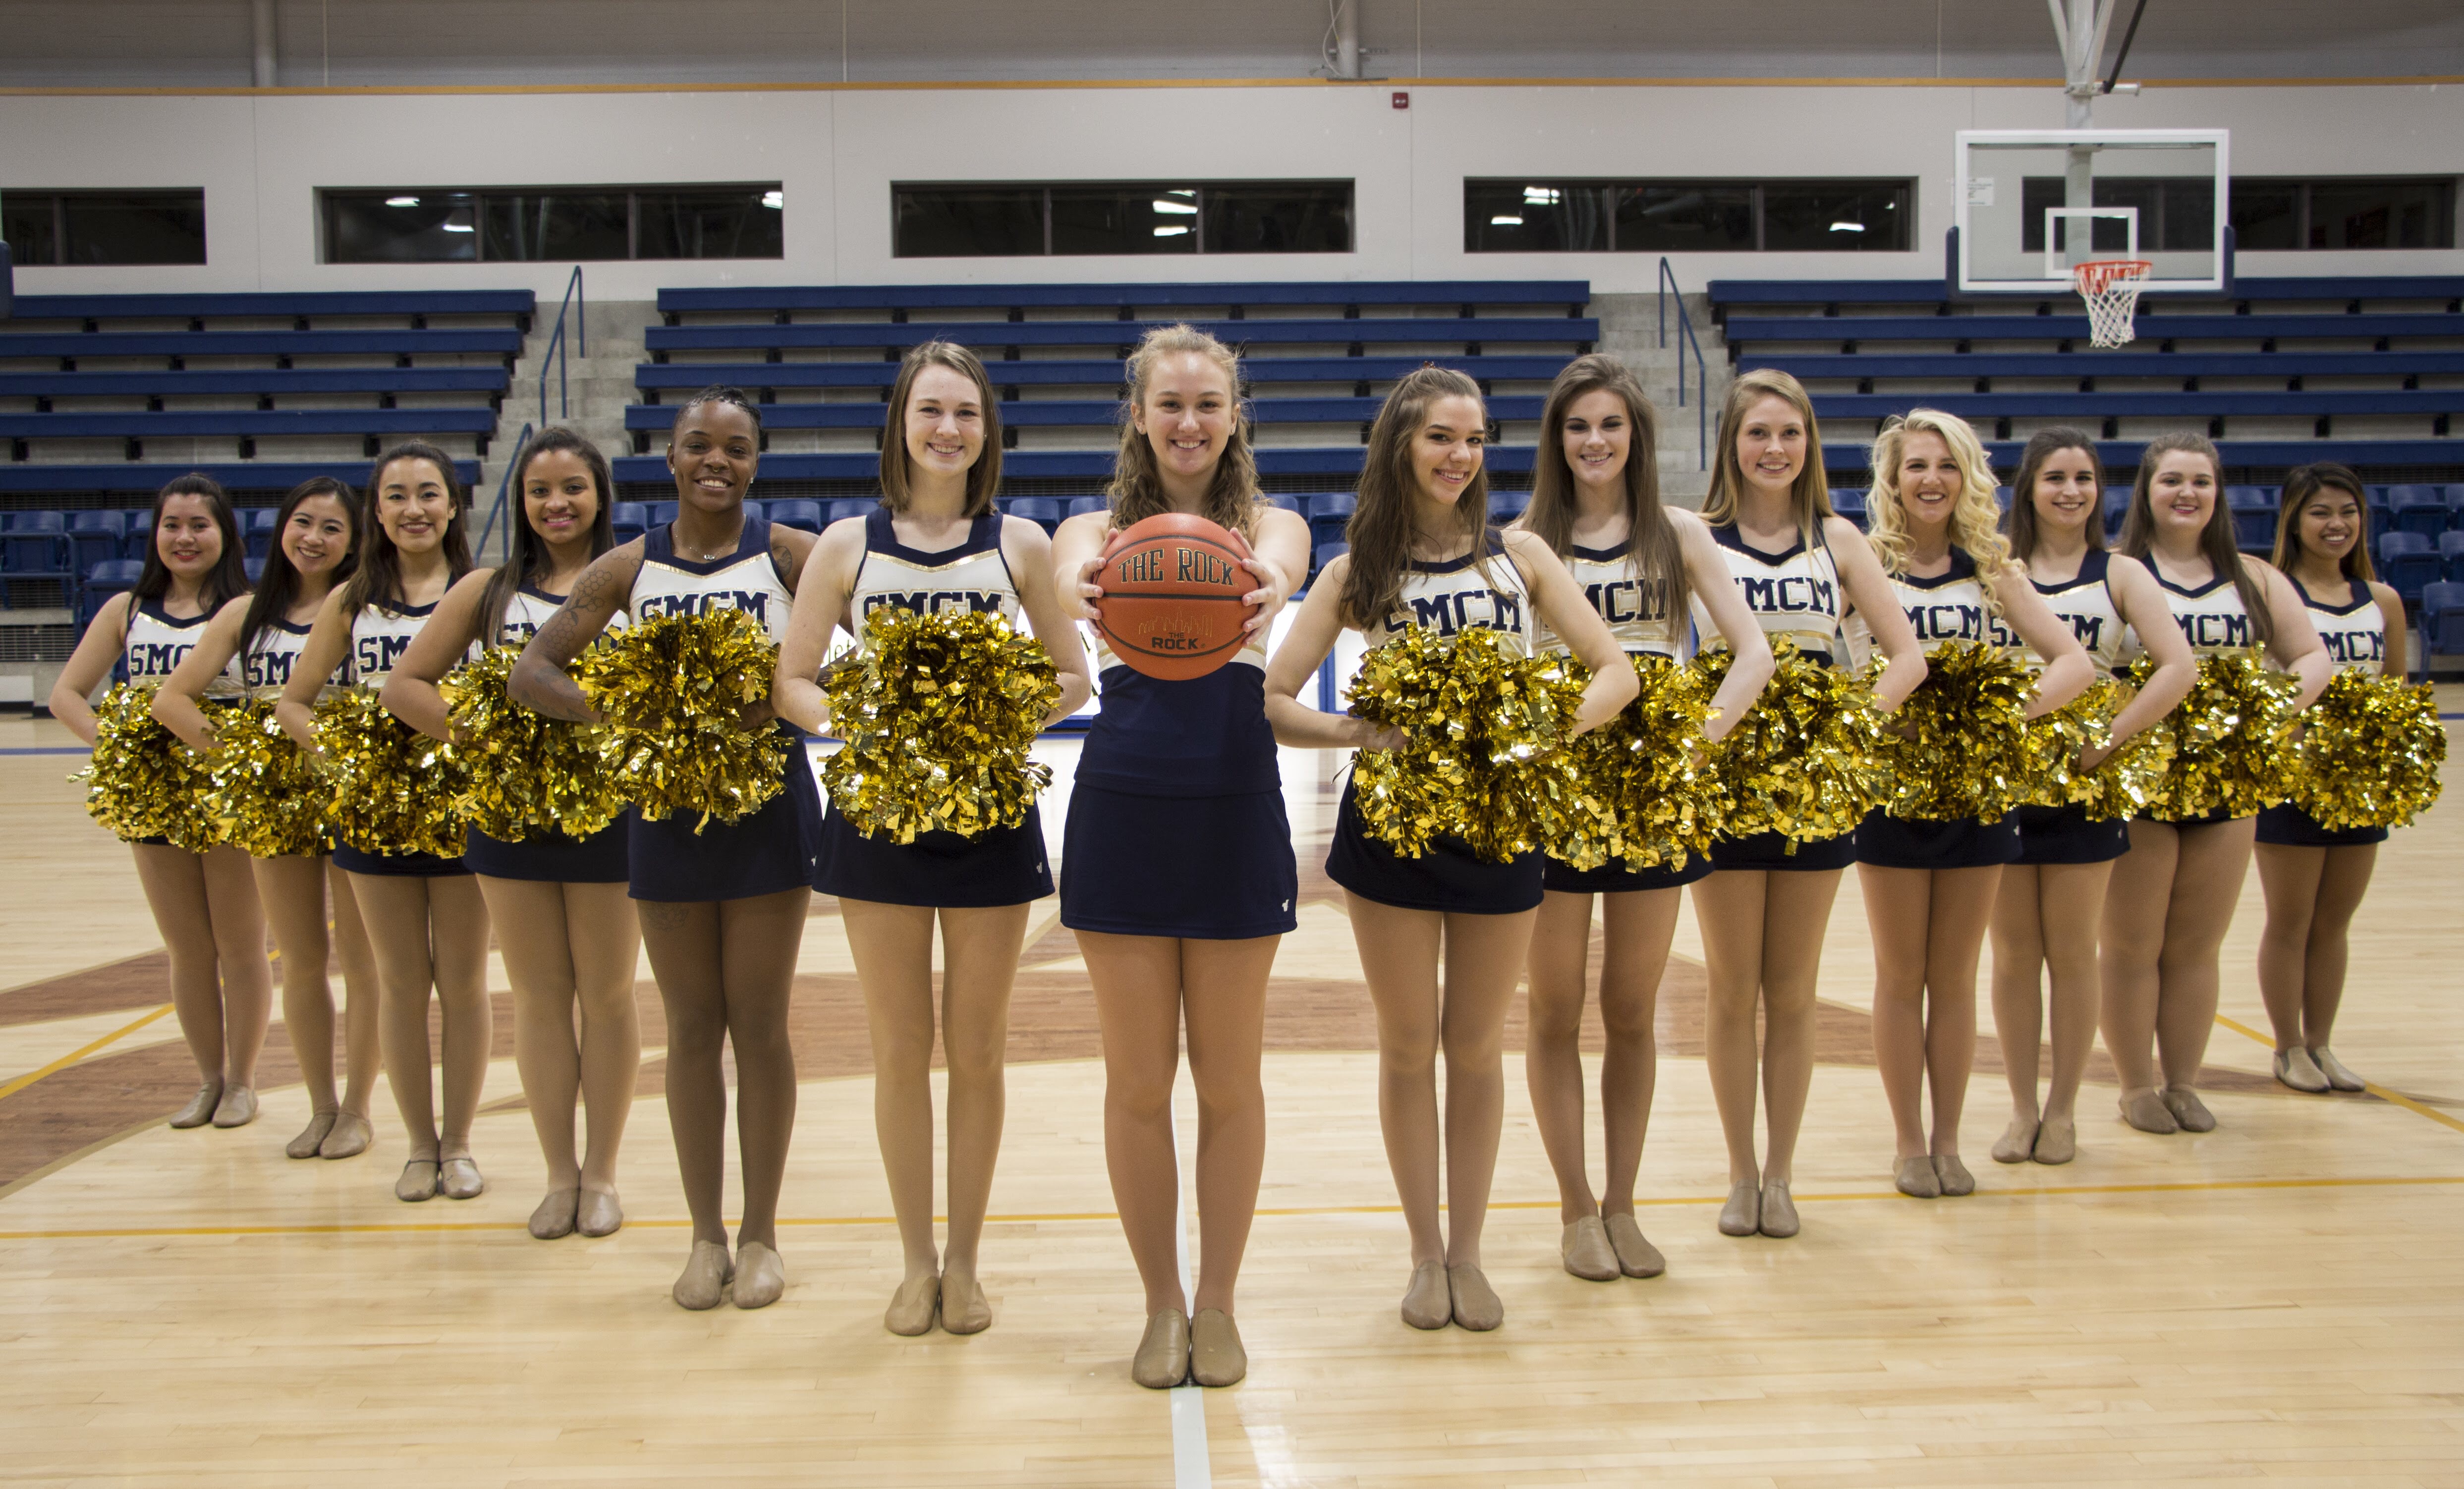 A group of cheerleaders standing in a triangle formation on an indoor basketball court.